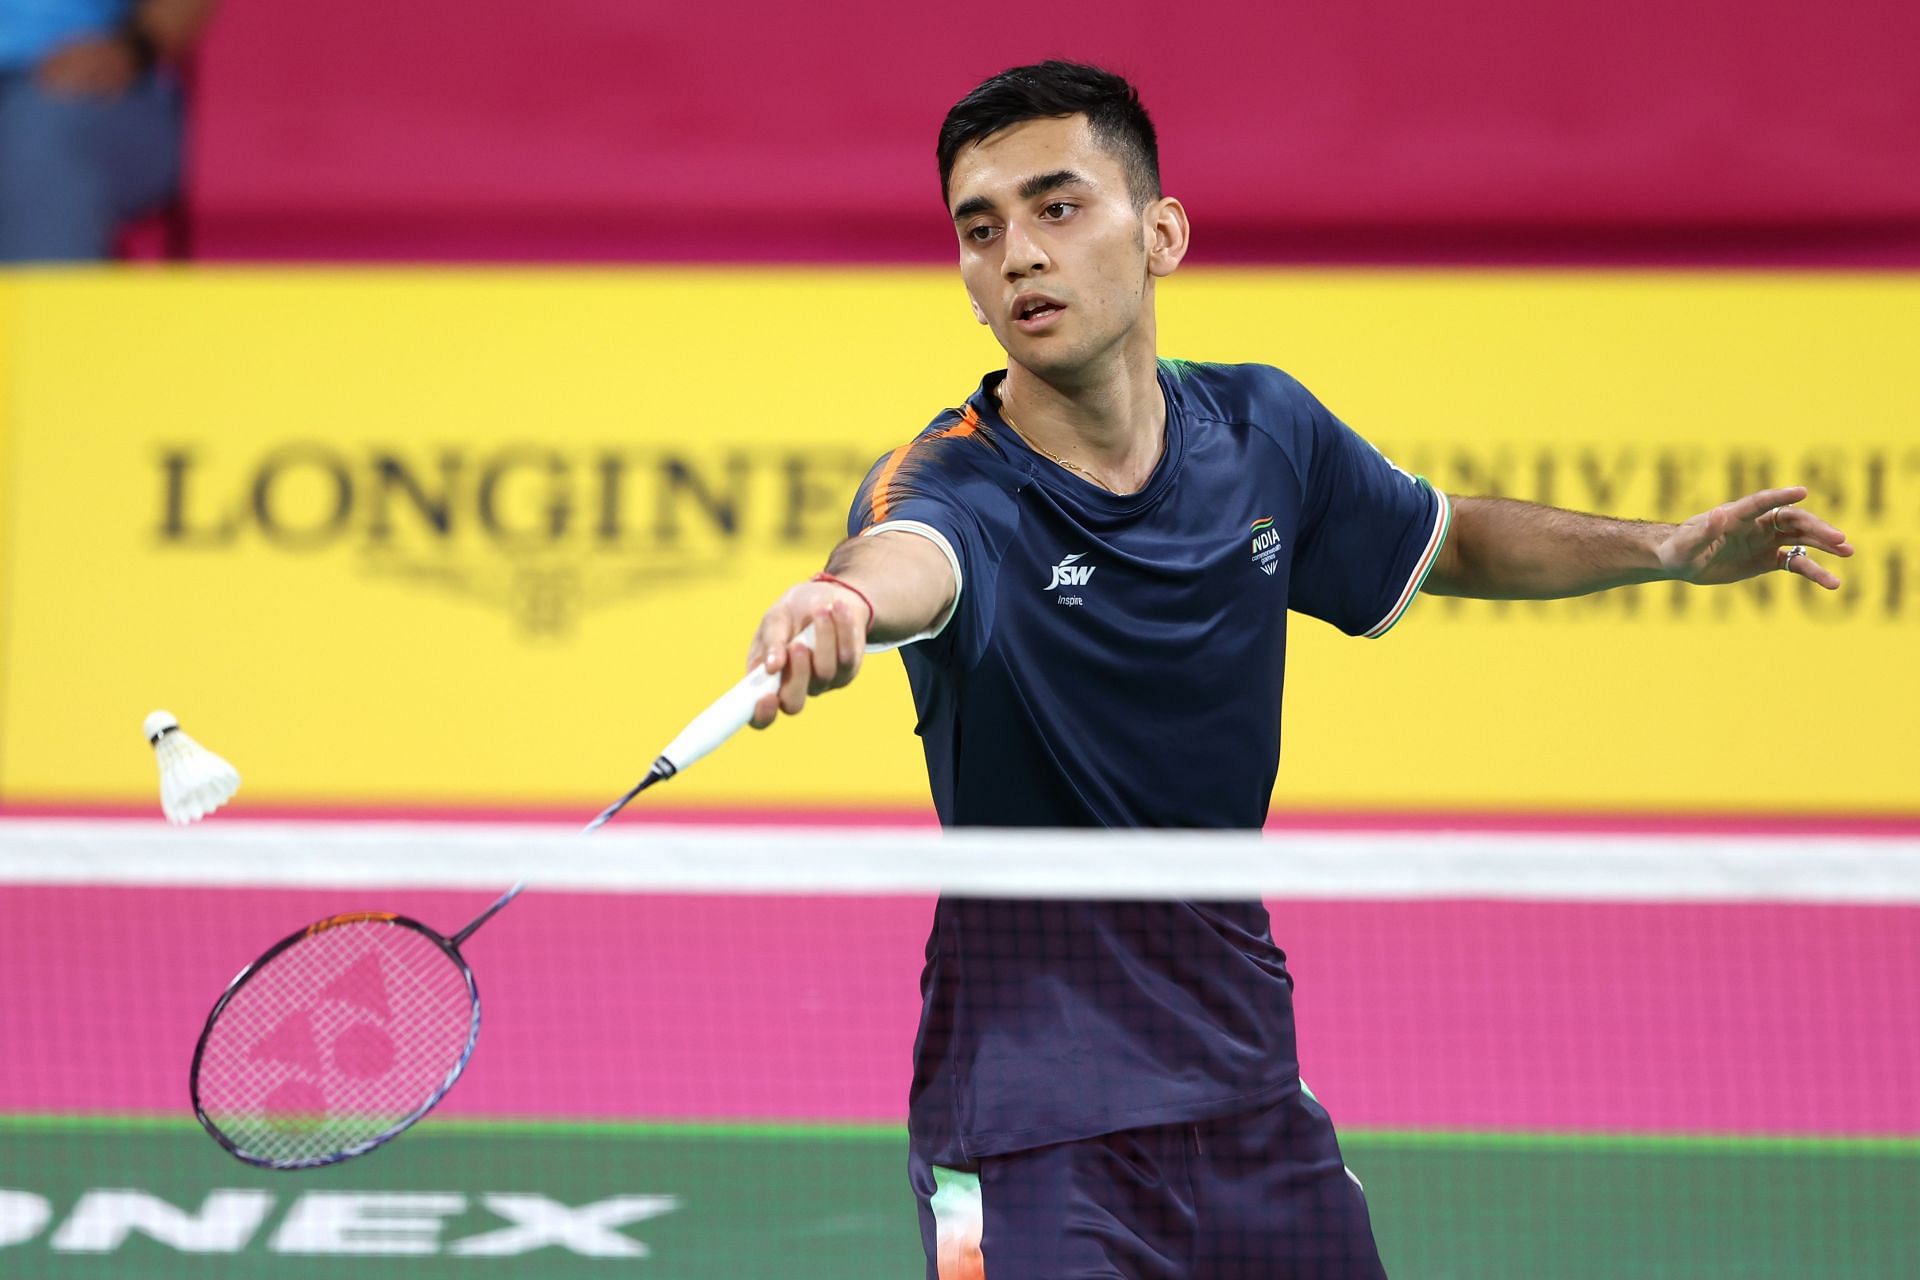 Canada Open 2023 Lakshya Sen vs Kunlavut Vitidsarn, head-to-head, prediction, where to watch and live streaming details